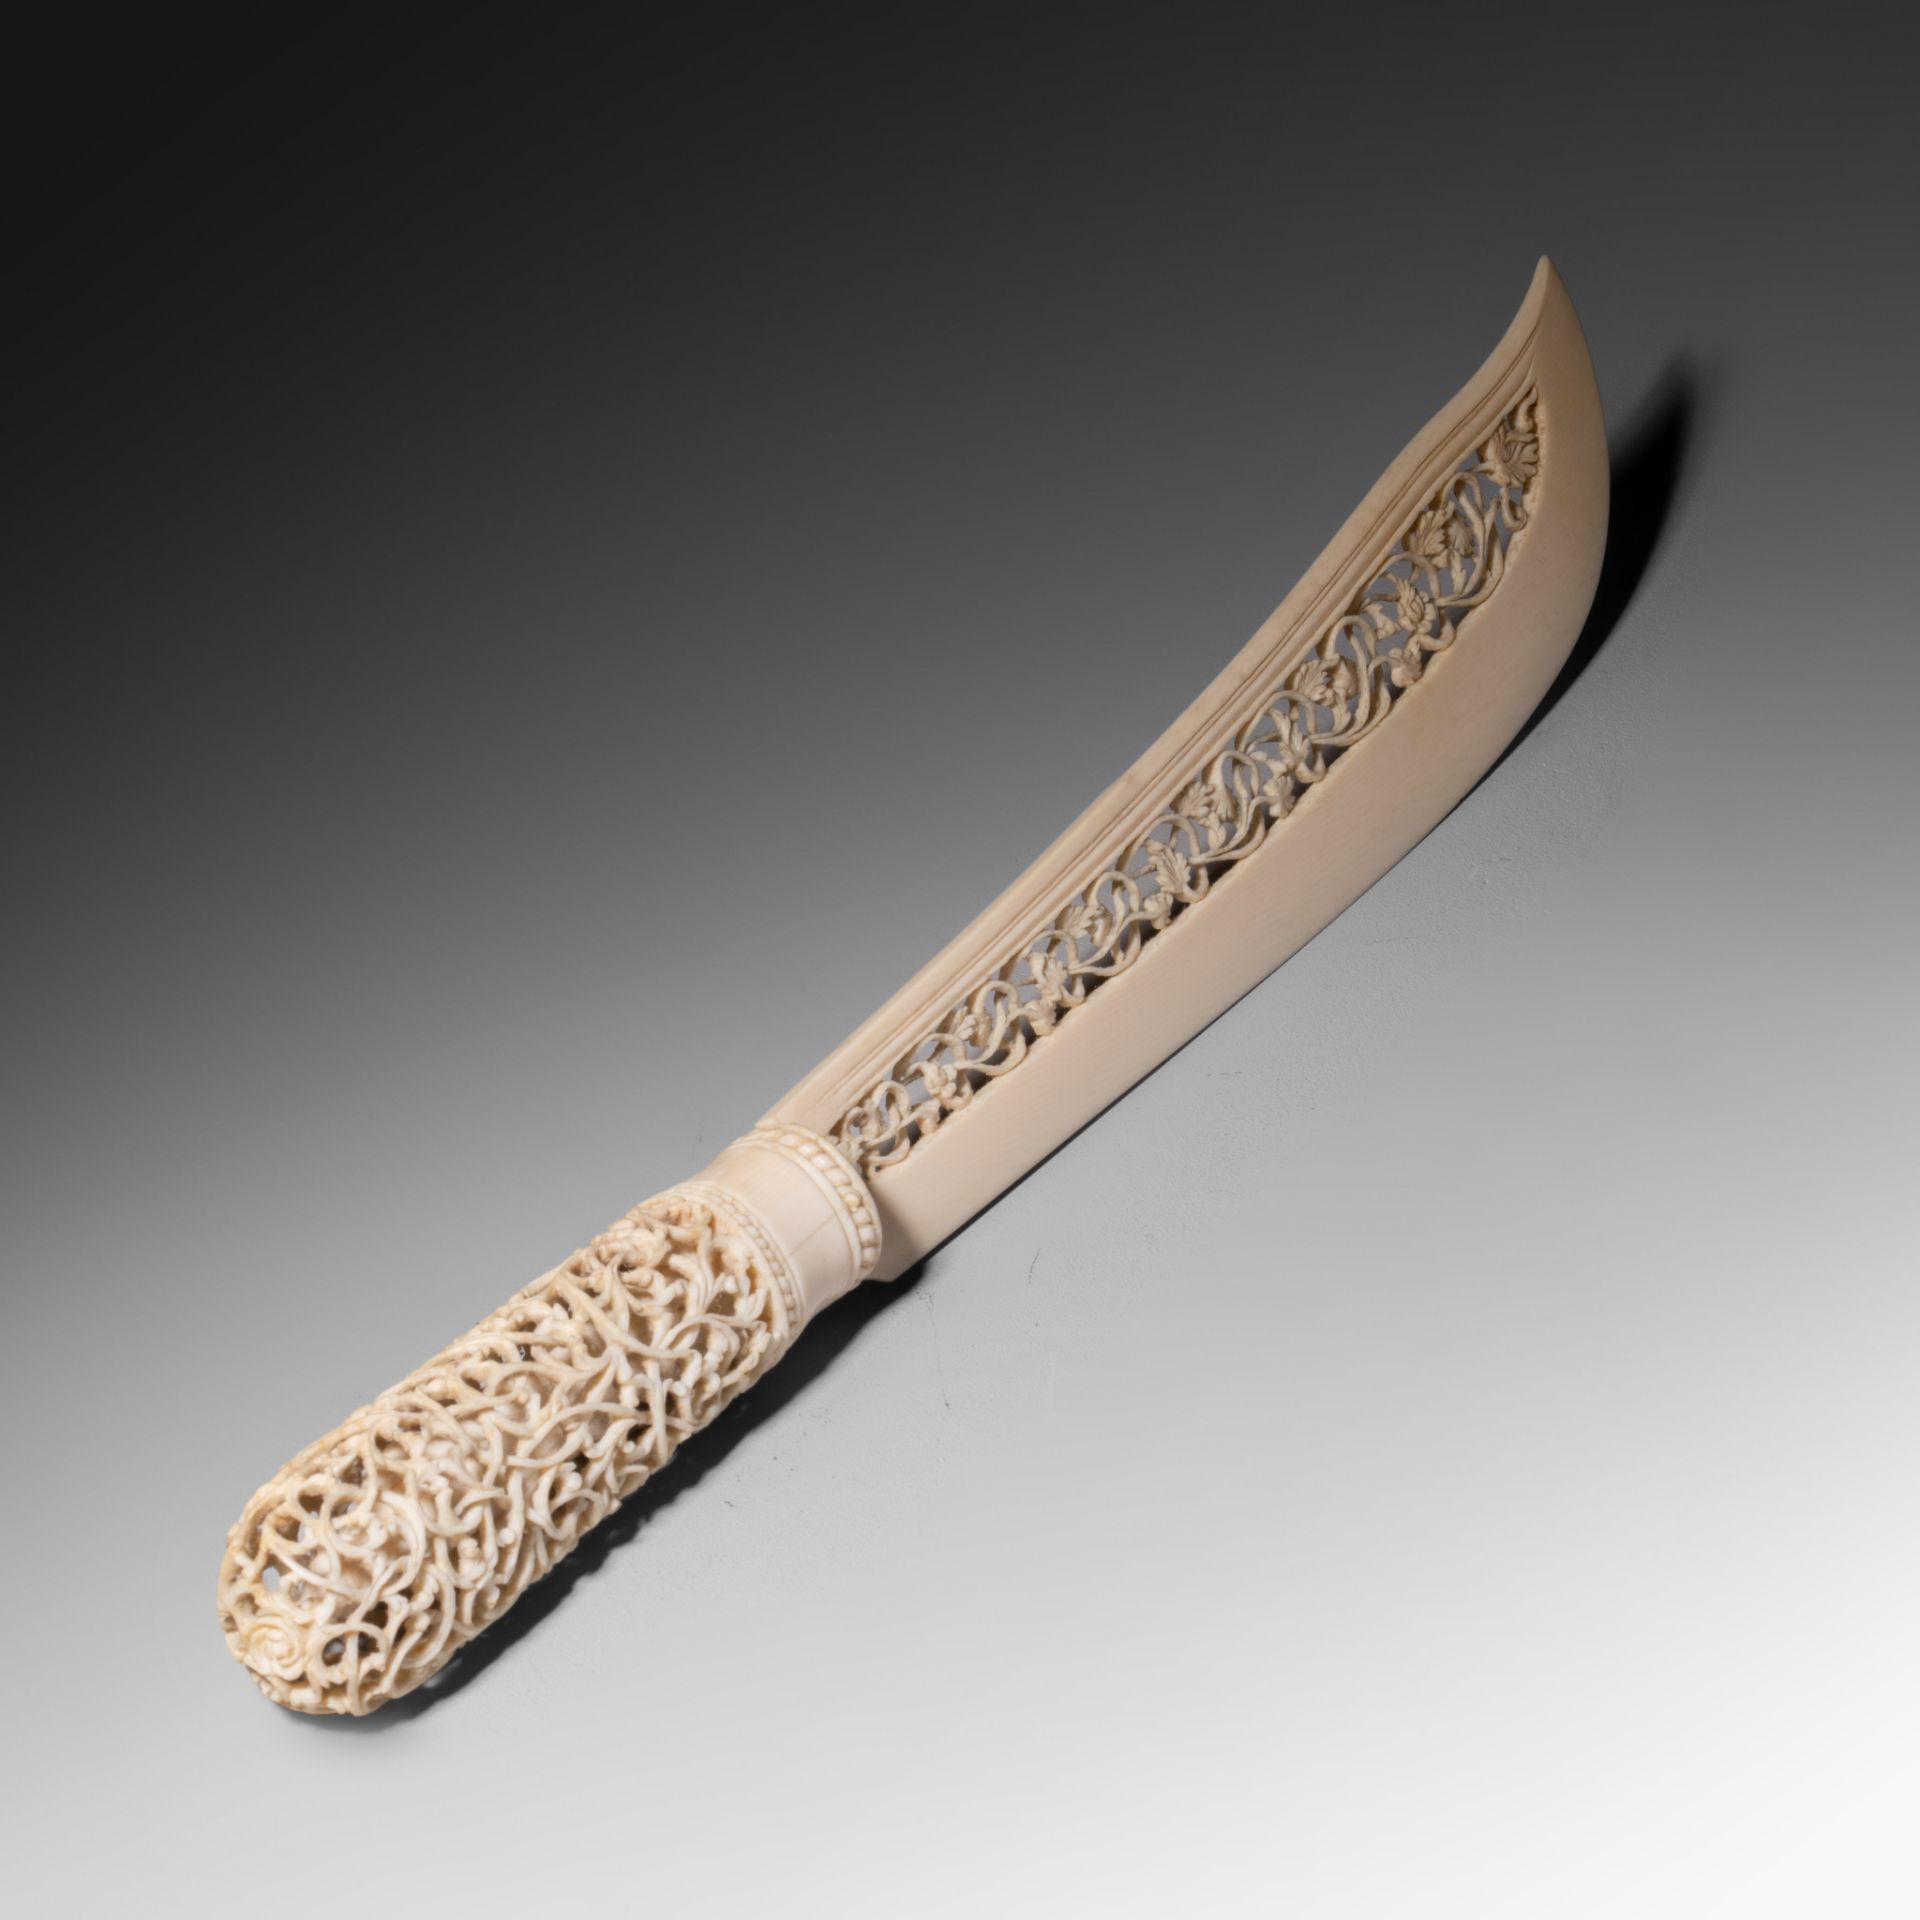 Two Burmese Colonial Ivory paperknives, L 51 cm - 200 g / L 35,8 cm - 80 g, both items are 19th or e - Bild 8 aus 18